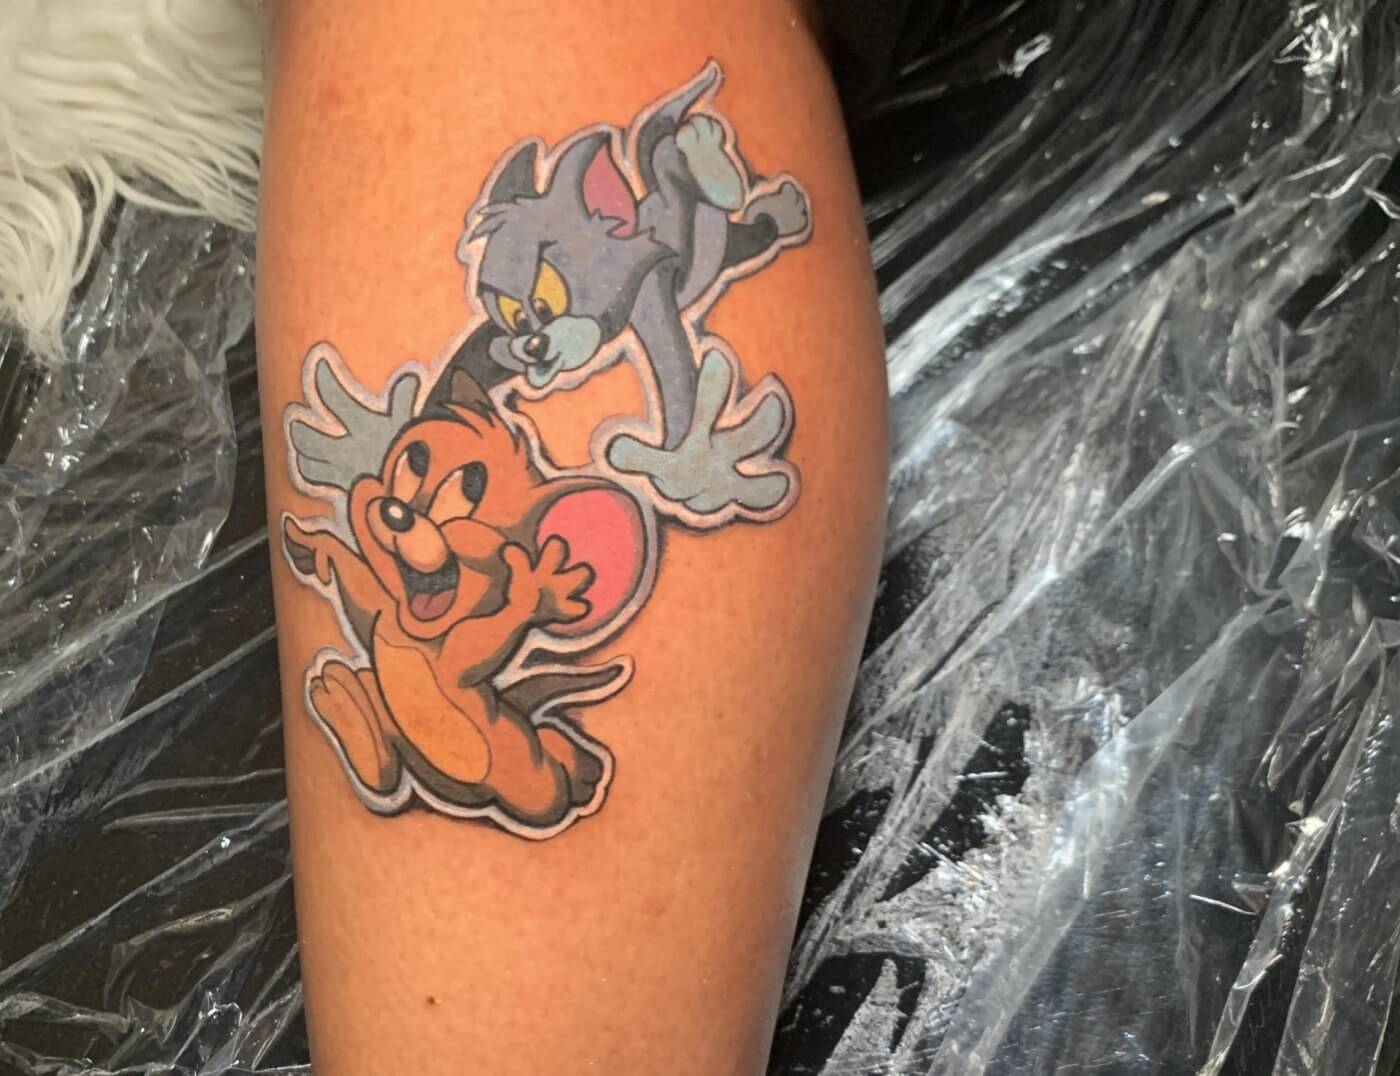 Tom & Jerry Cartoon anime tattoo by J.R. Outlaw of Iron Palm Tattoos. Tom & Jerry are classic americana and we get more than a few requests to ink these animated legends. We're open late night until 2 AM most nights. Call 404-973-7828 or stop by for a free consultation.